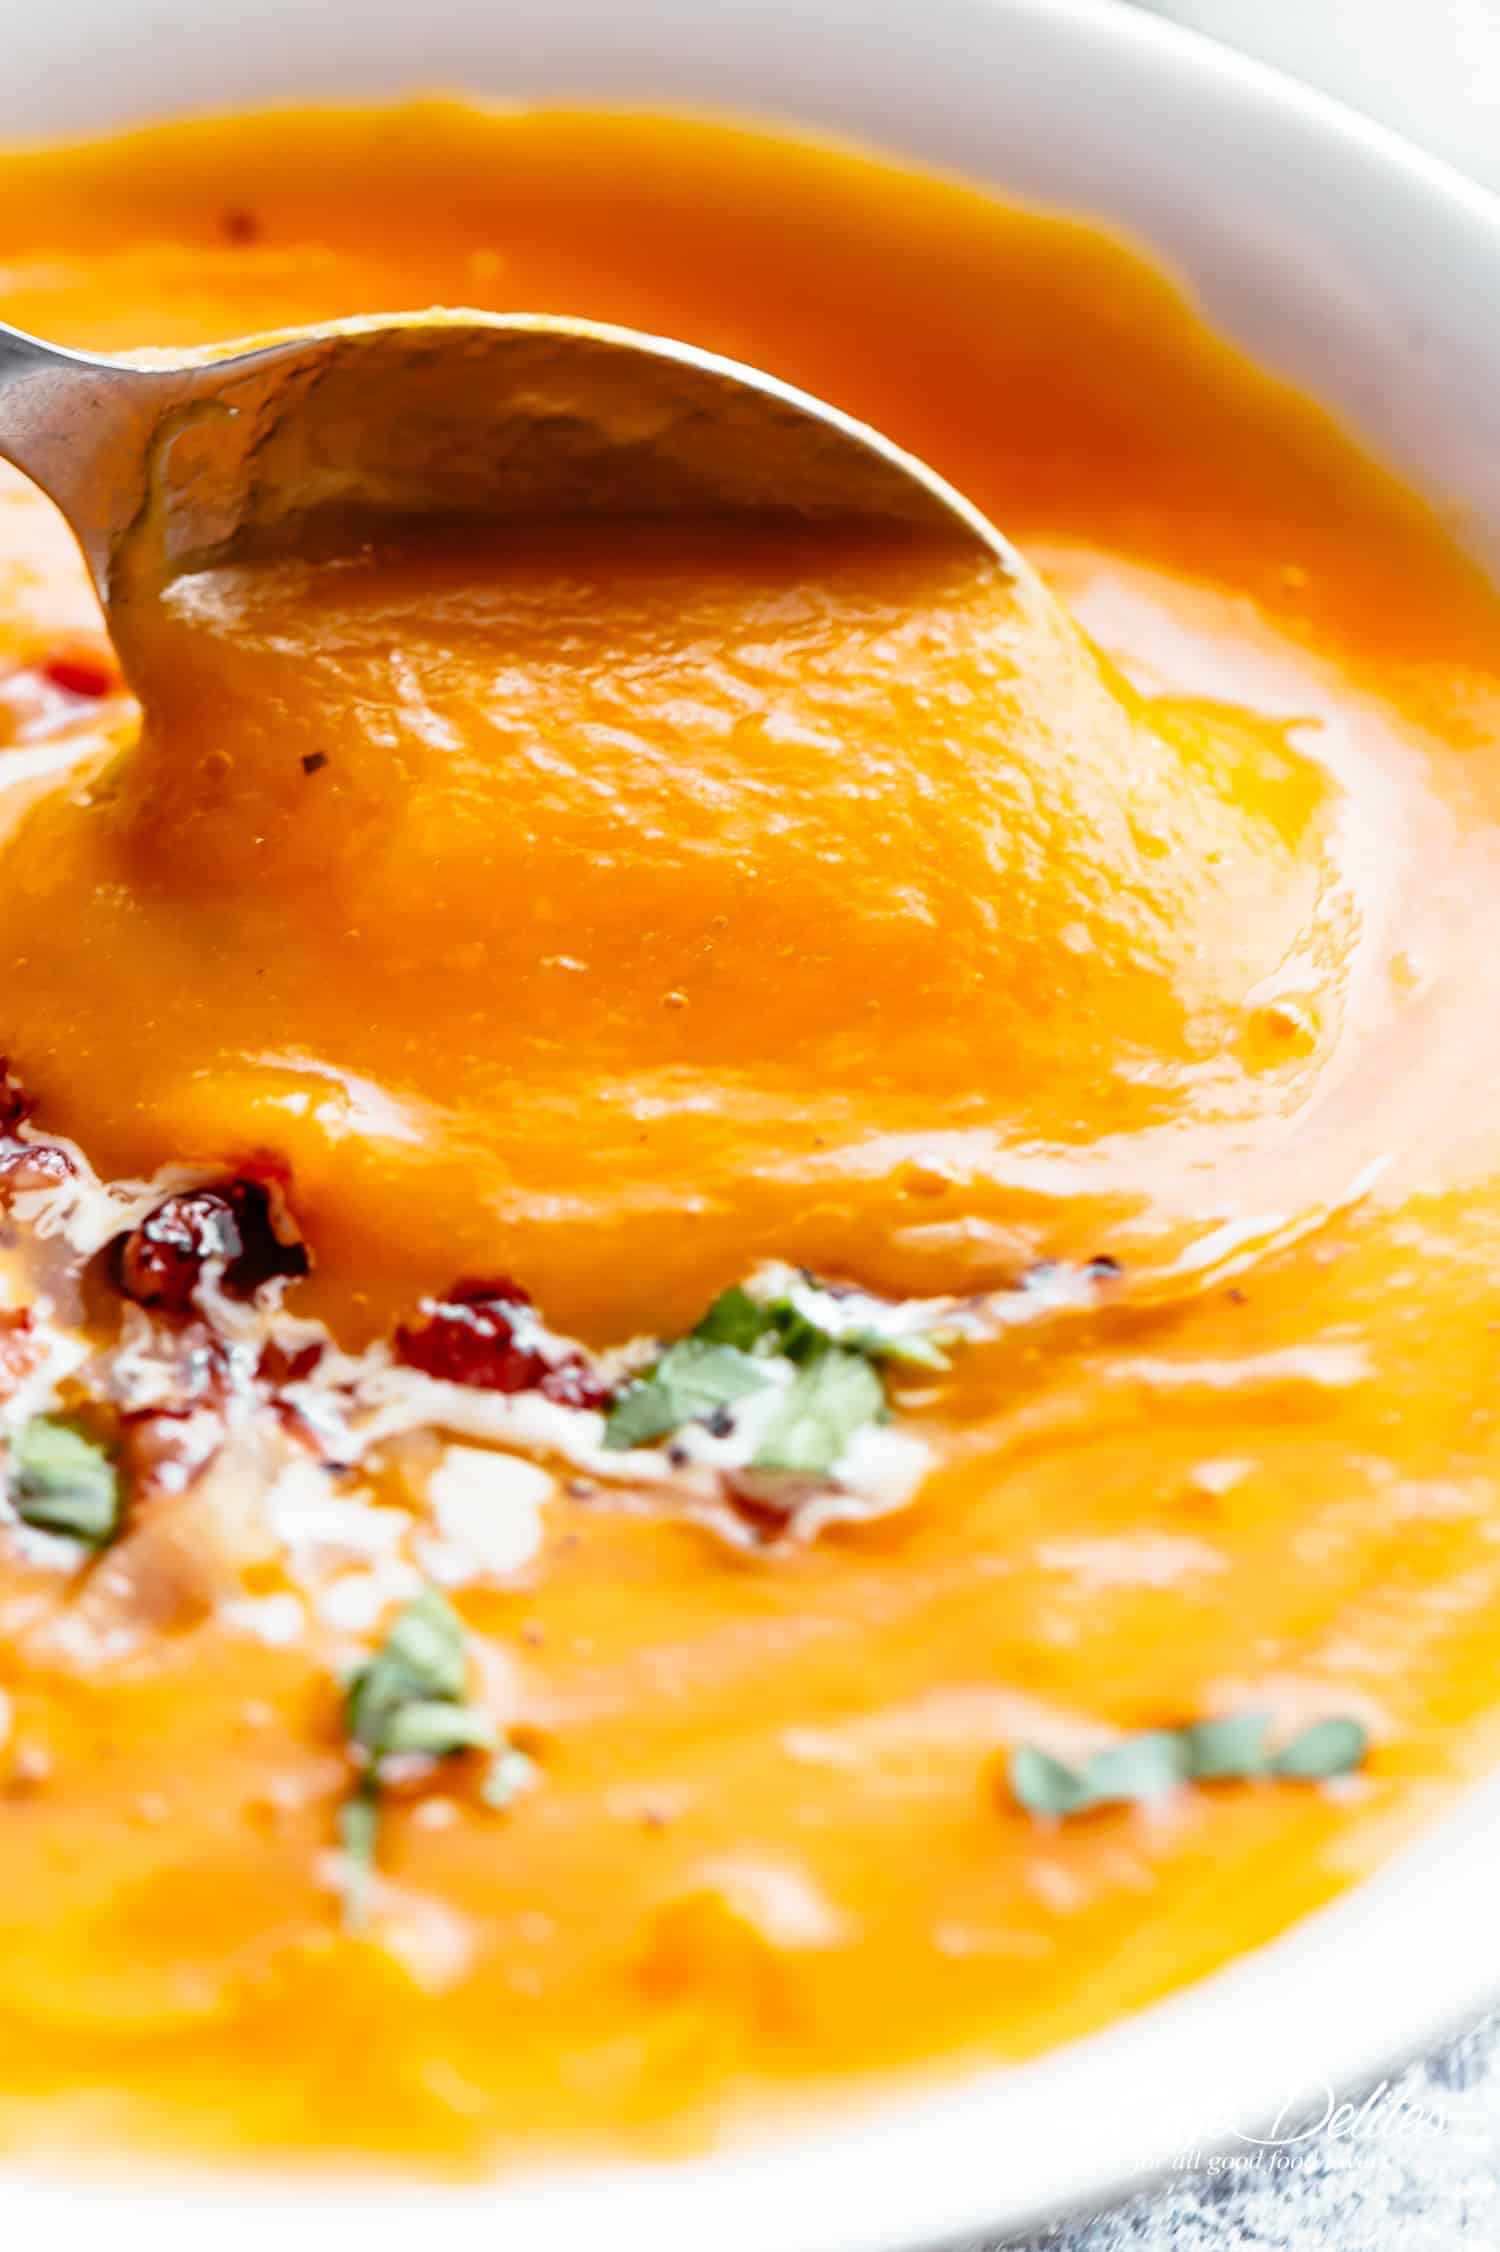 Deliciously easy Butternut Squash Soup is so rich in butternut flavour. Naturally thick and creamy, perfect for the season and always a hit! This recipe is perfect for when you're craving homemade butternut squash soup. | cafedelites.com